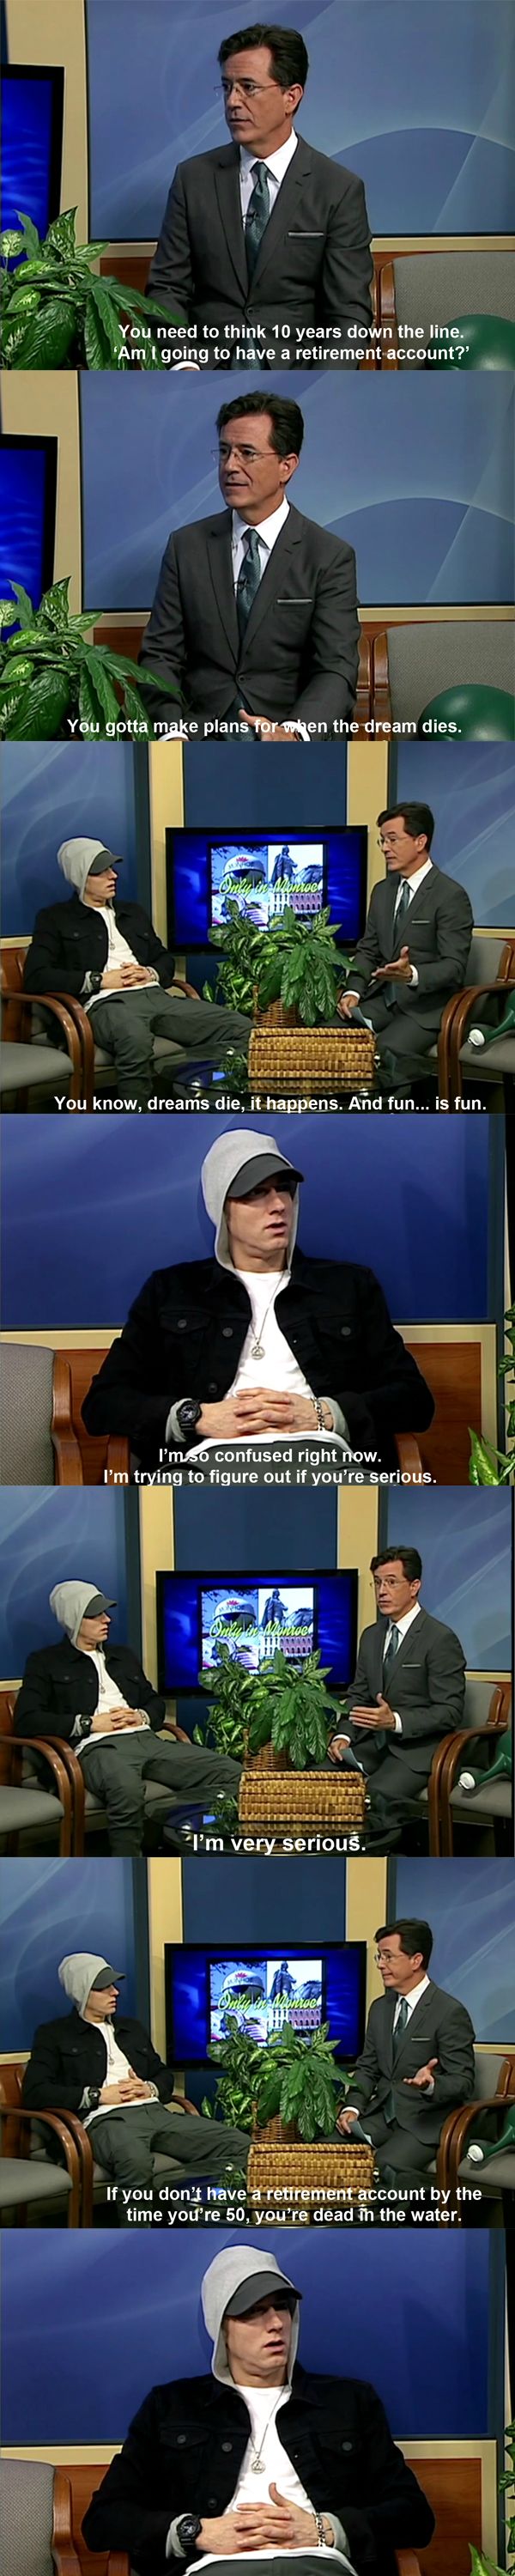 Colbert and Eminem in the same room = gold.